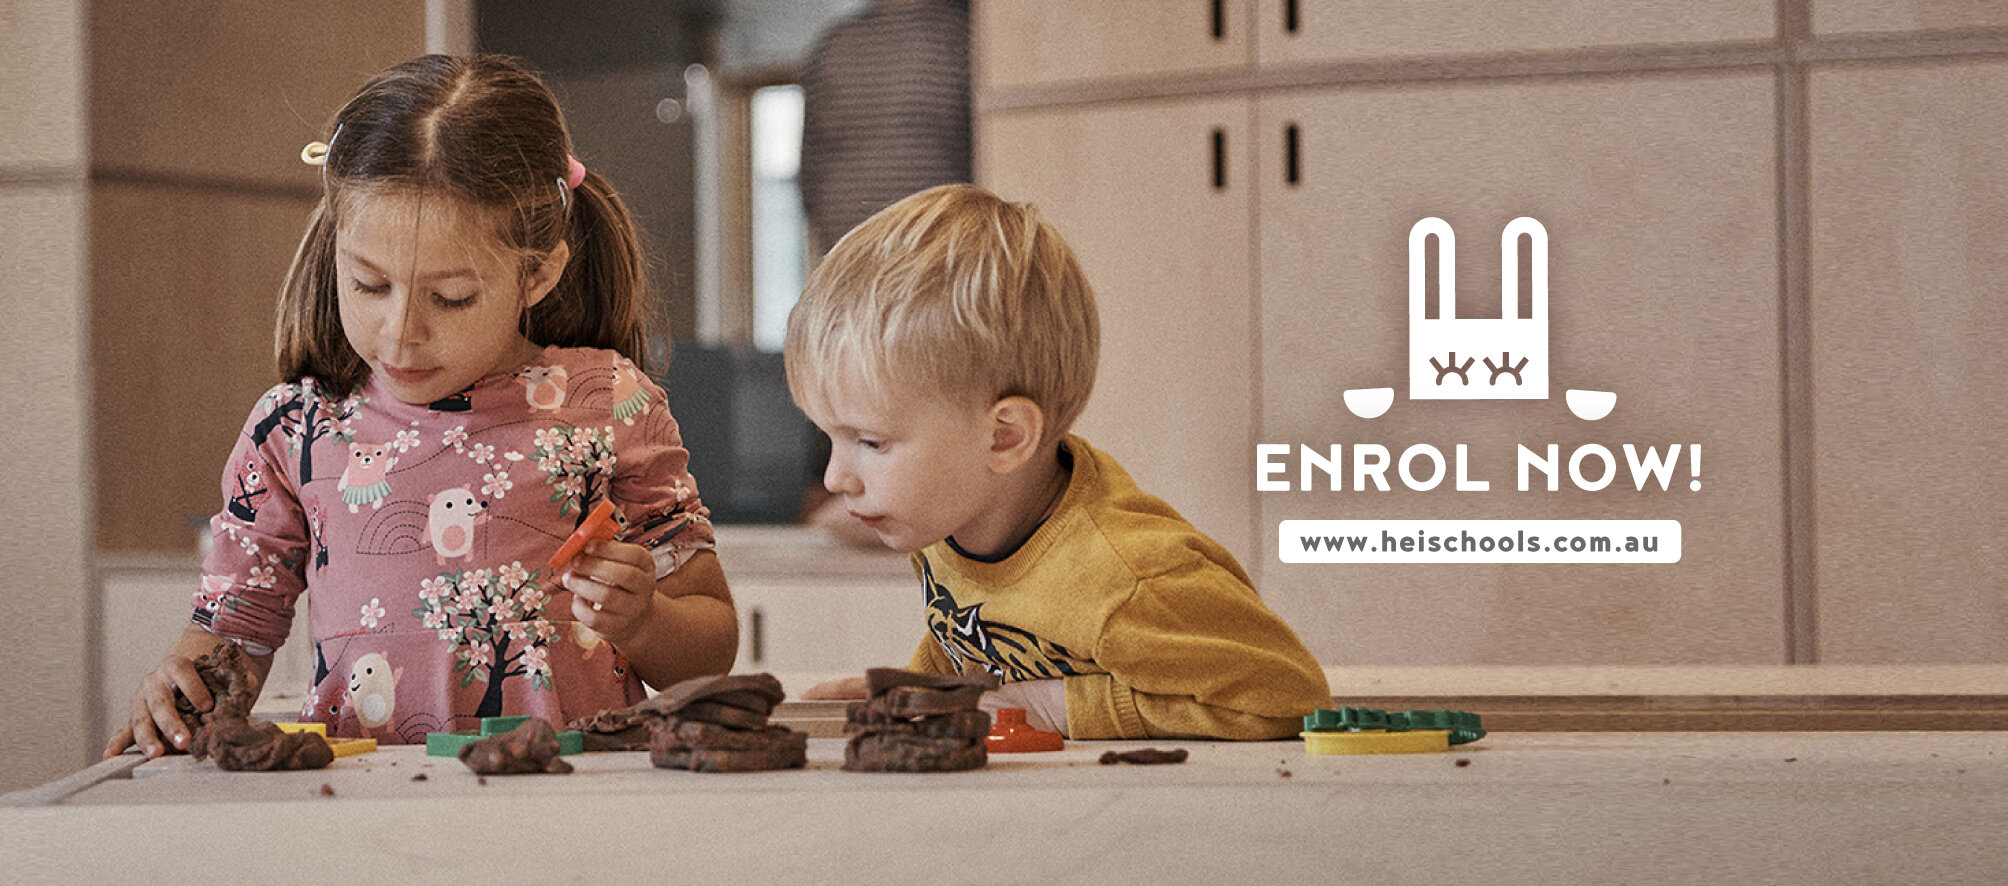 HEI Schools Emerald ELC is a high quality early learning centre that successfully combines the standards of education and care from both Australian and Finnish curriculums. We have a strong focus on child-led programs that encourage children to guide